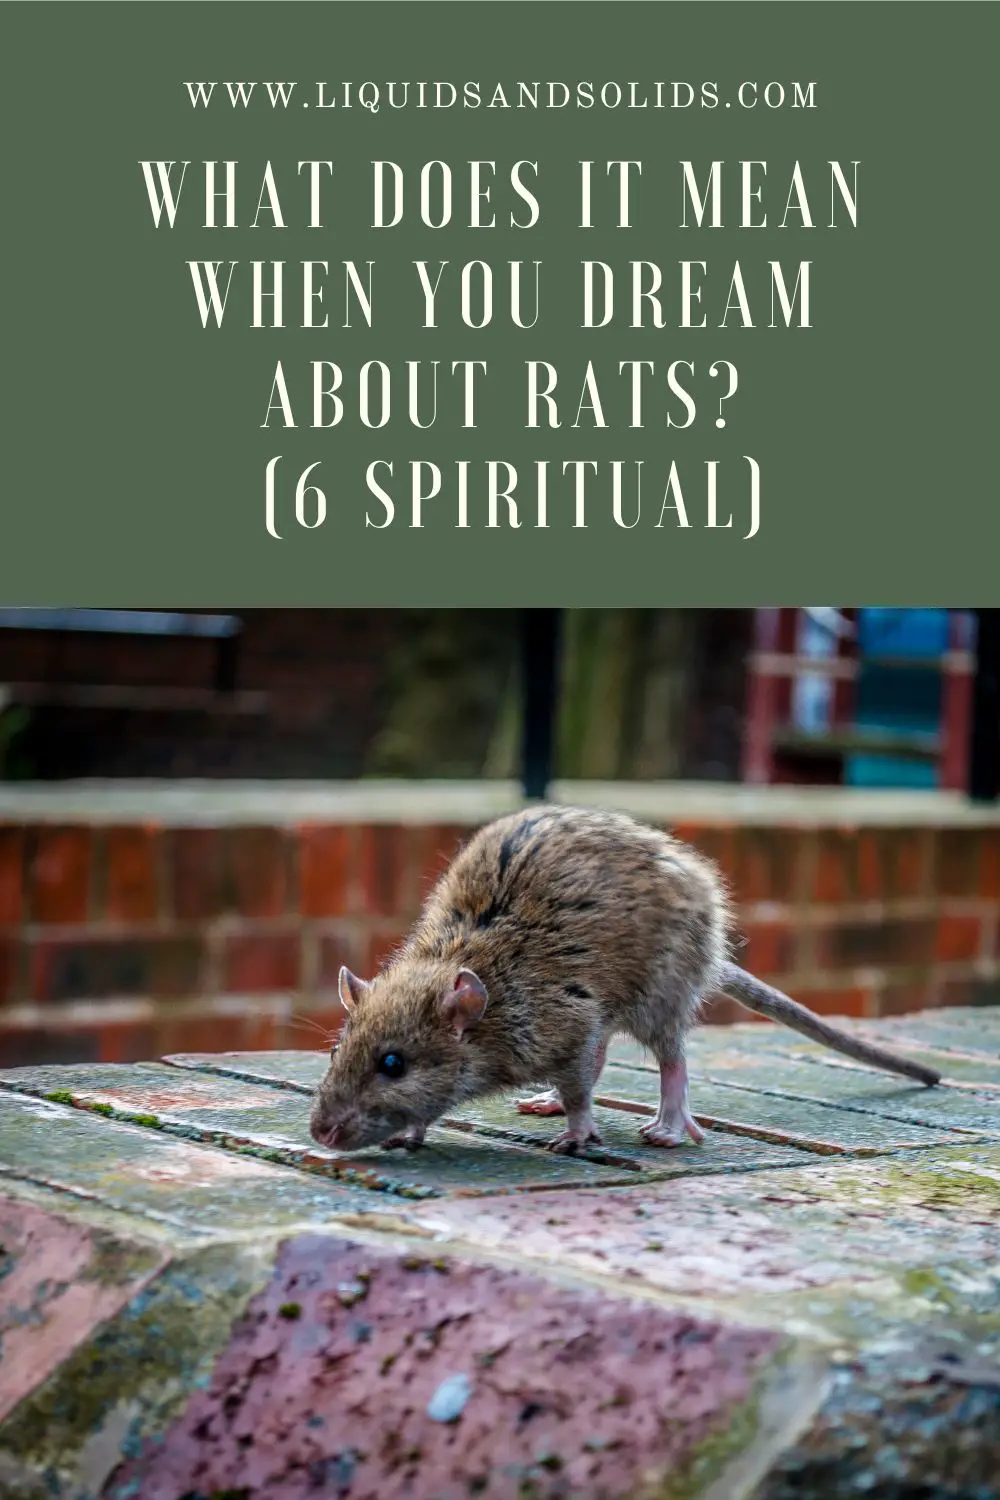 What Is The Spiritual Significance Of A Rat In A Dream?